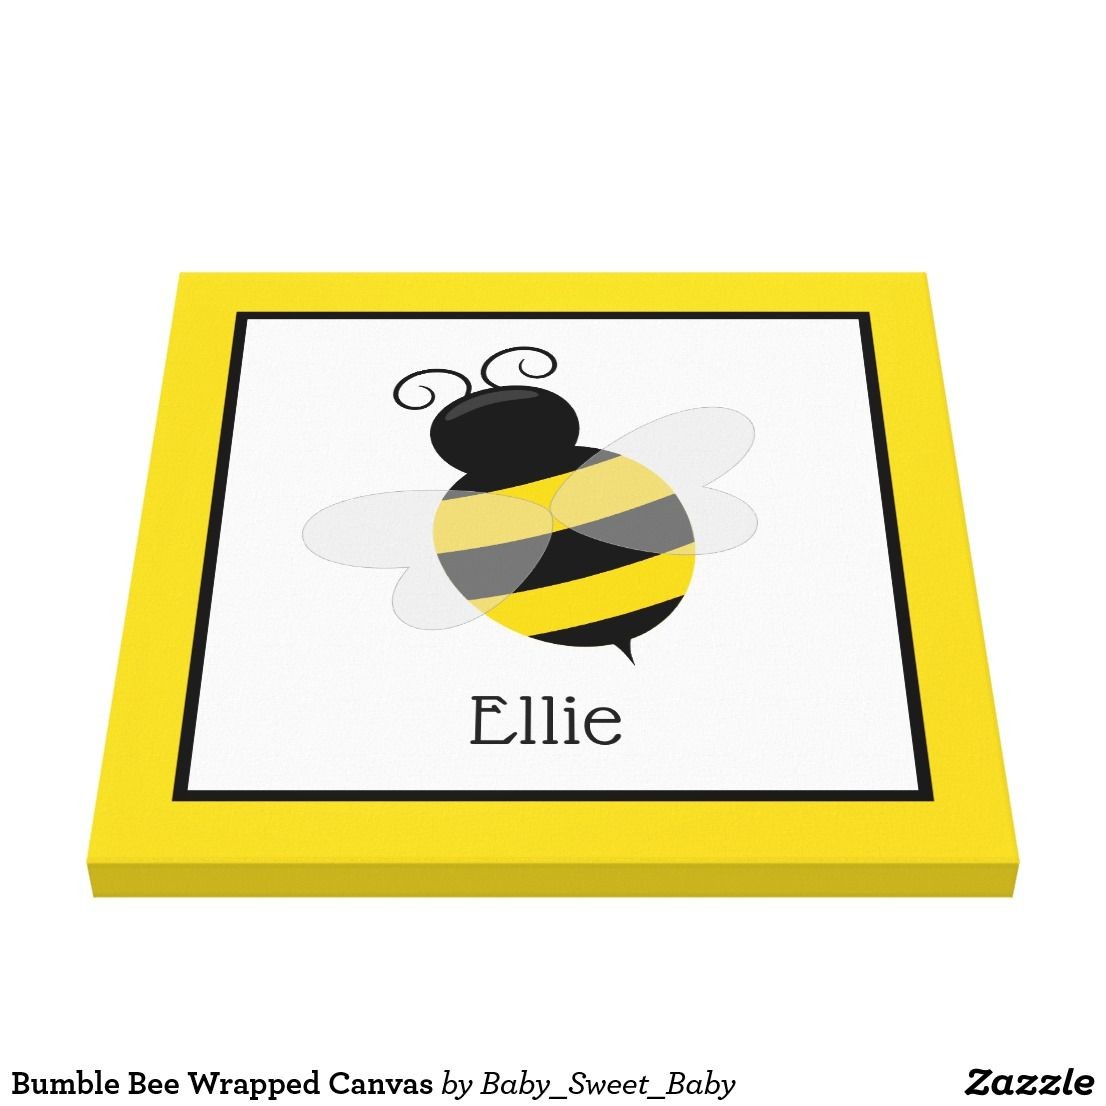 Bumblebee Papercraft Bumble Bee Wrapped Canvas Pinterest